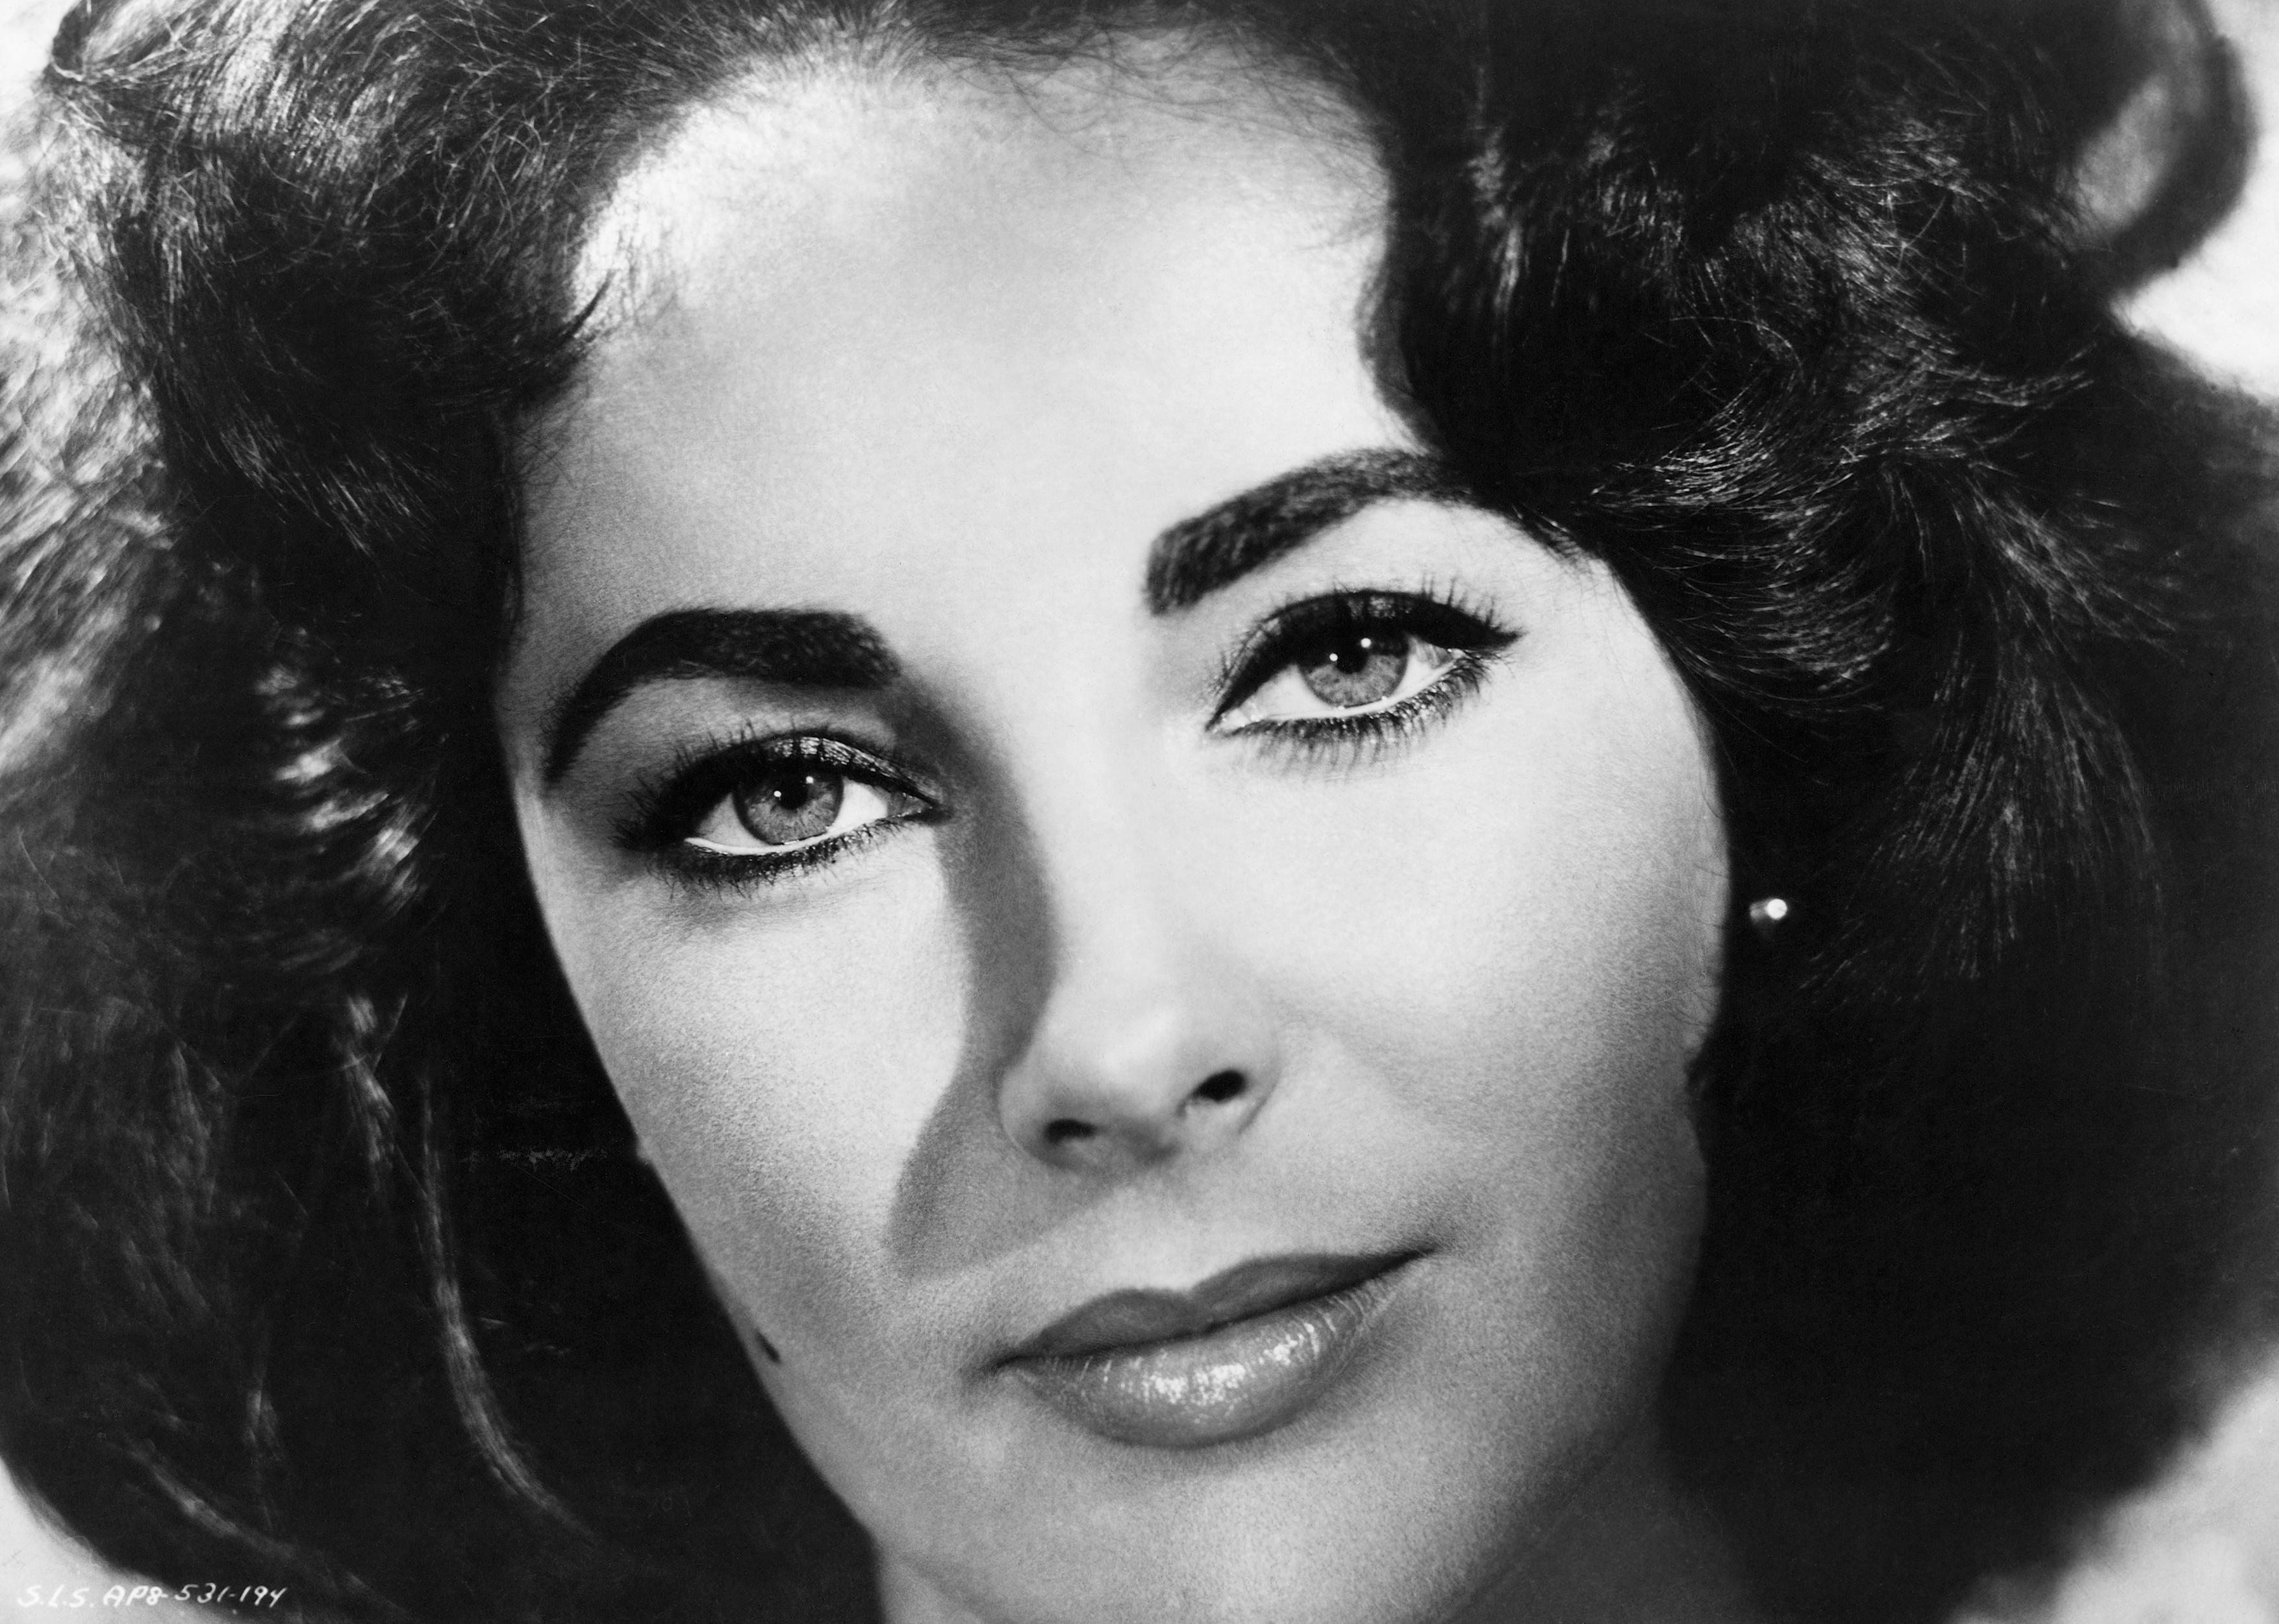 Elizabeth Taylor in black and white.